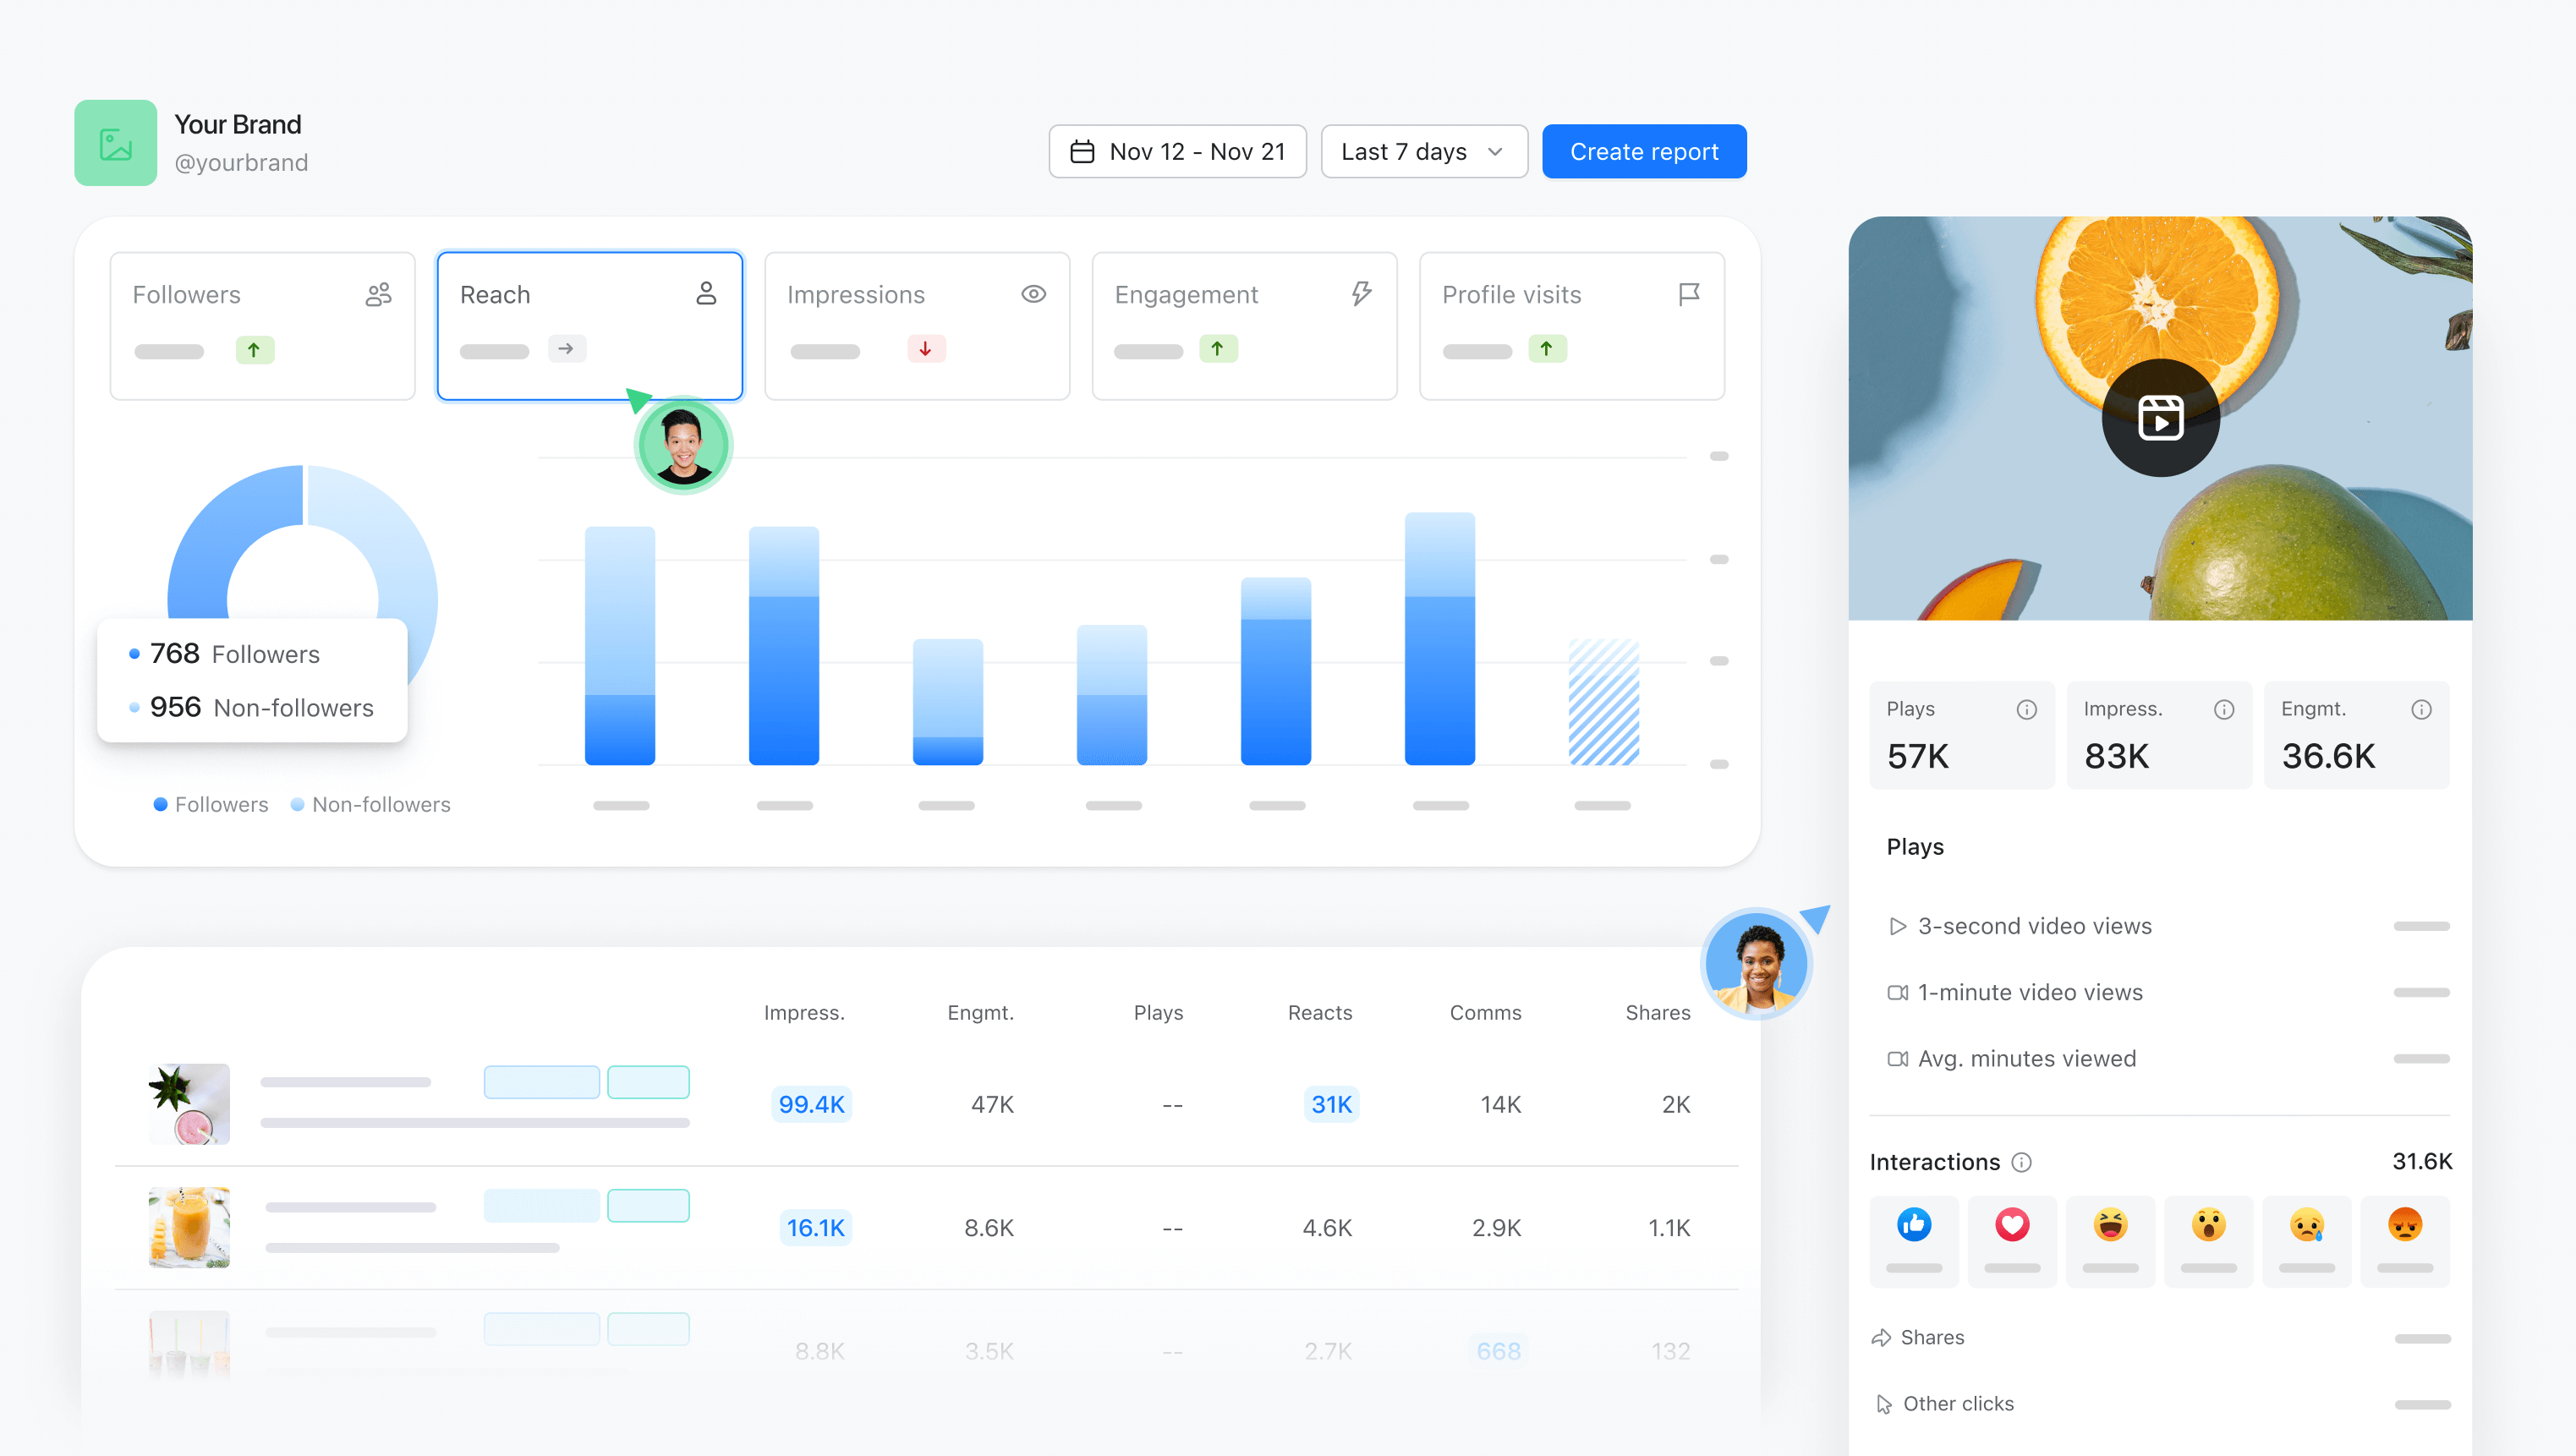 Social media analytics dashboard in Planable for "Your Brand" showing follower demographics, reach, impressions, engagement, profile visits, and detailed video performance metrics.